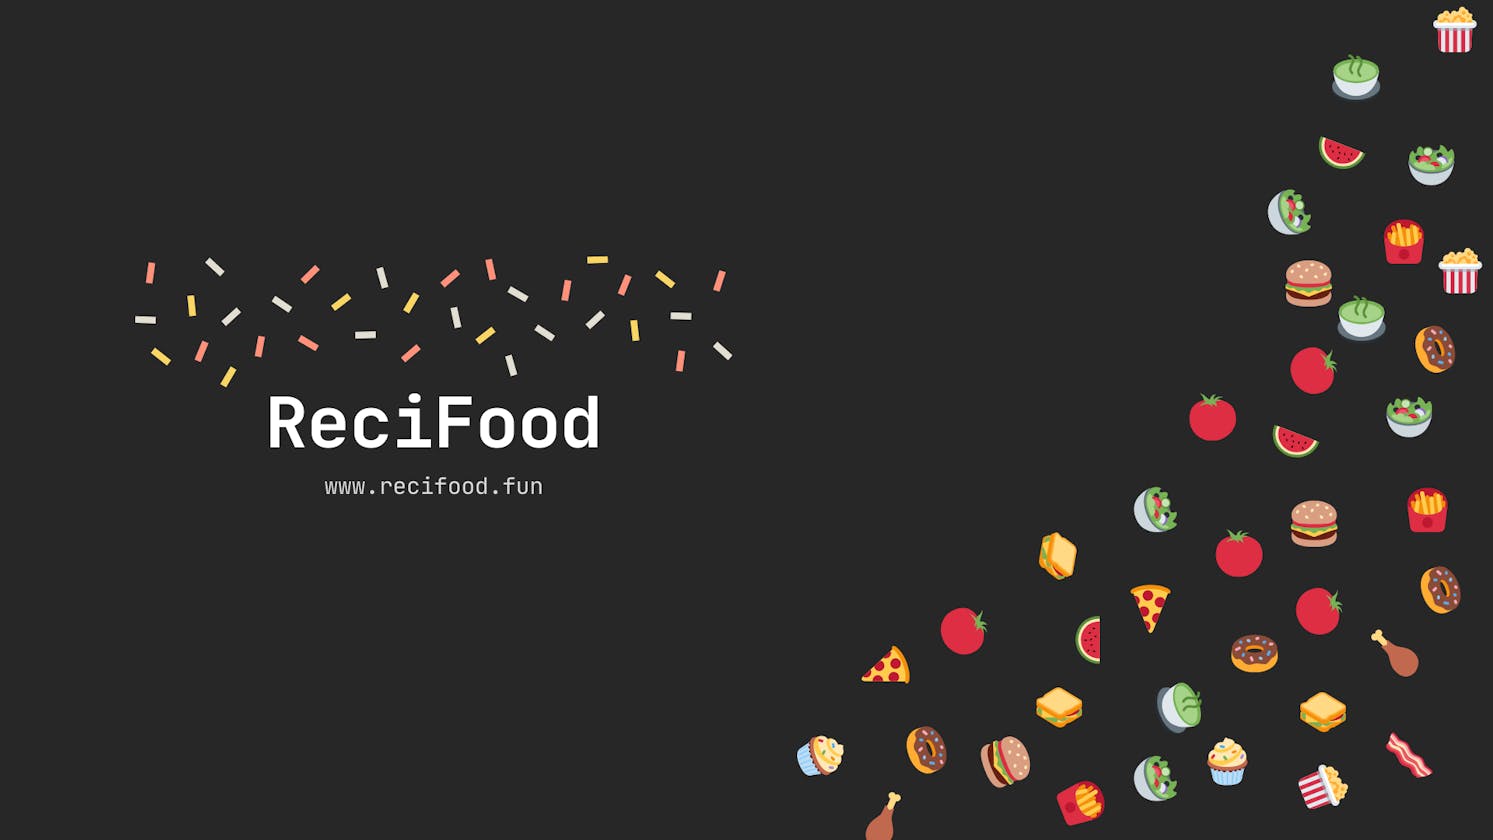 Recifood - Recipe Search App built with Next.js 🧁